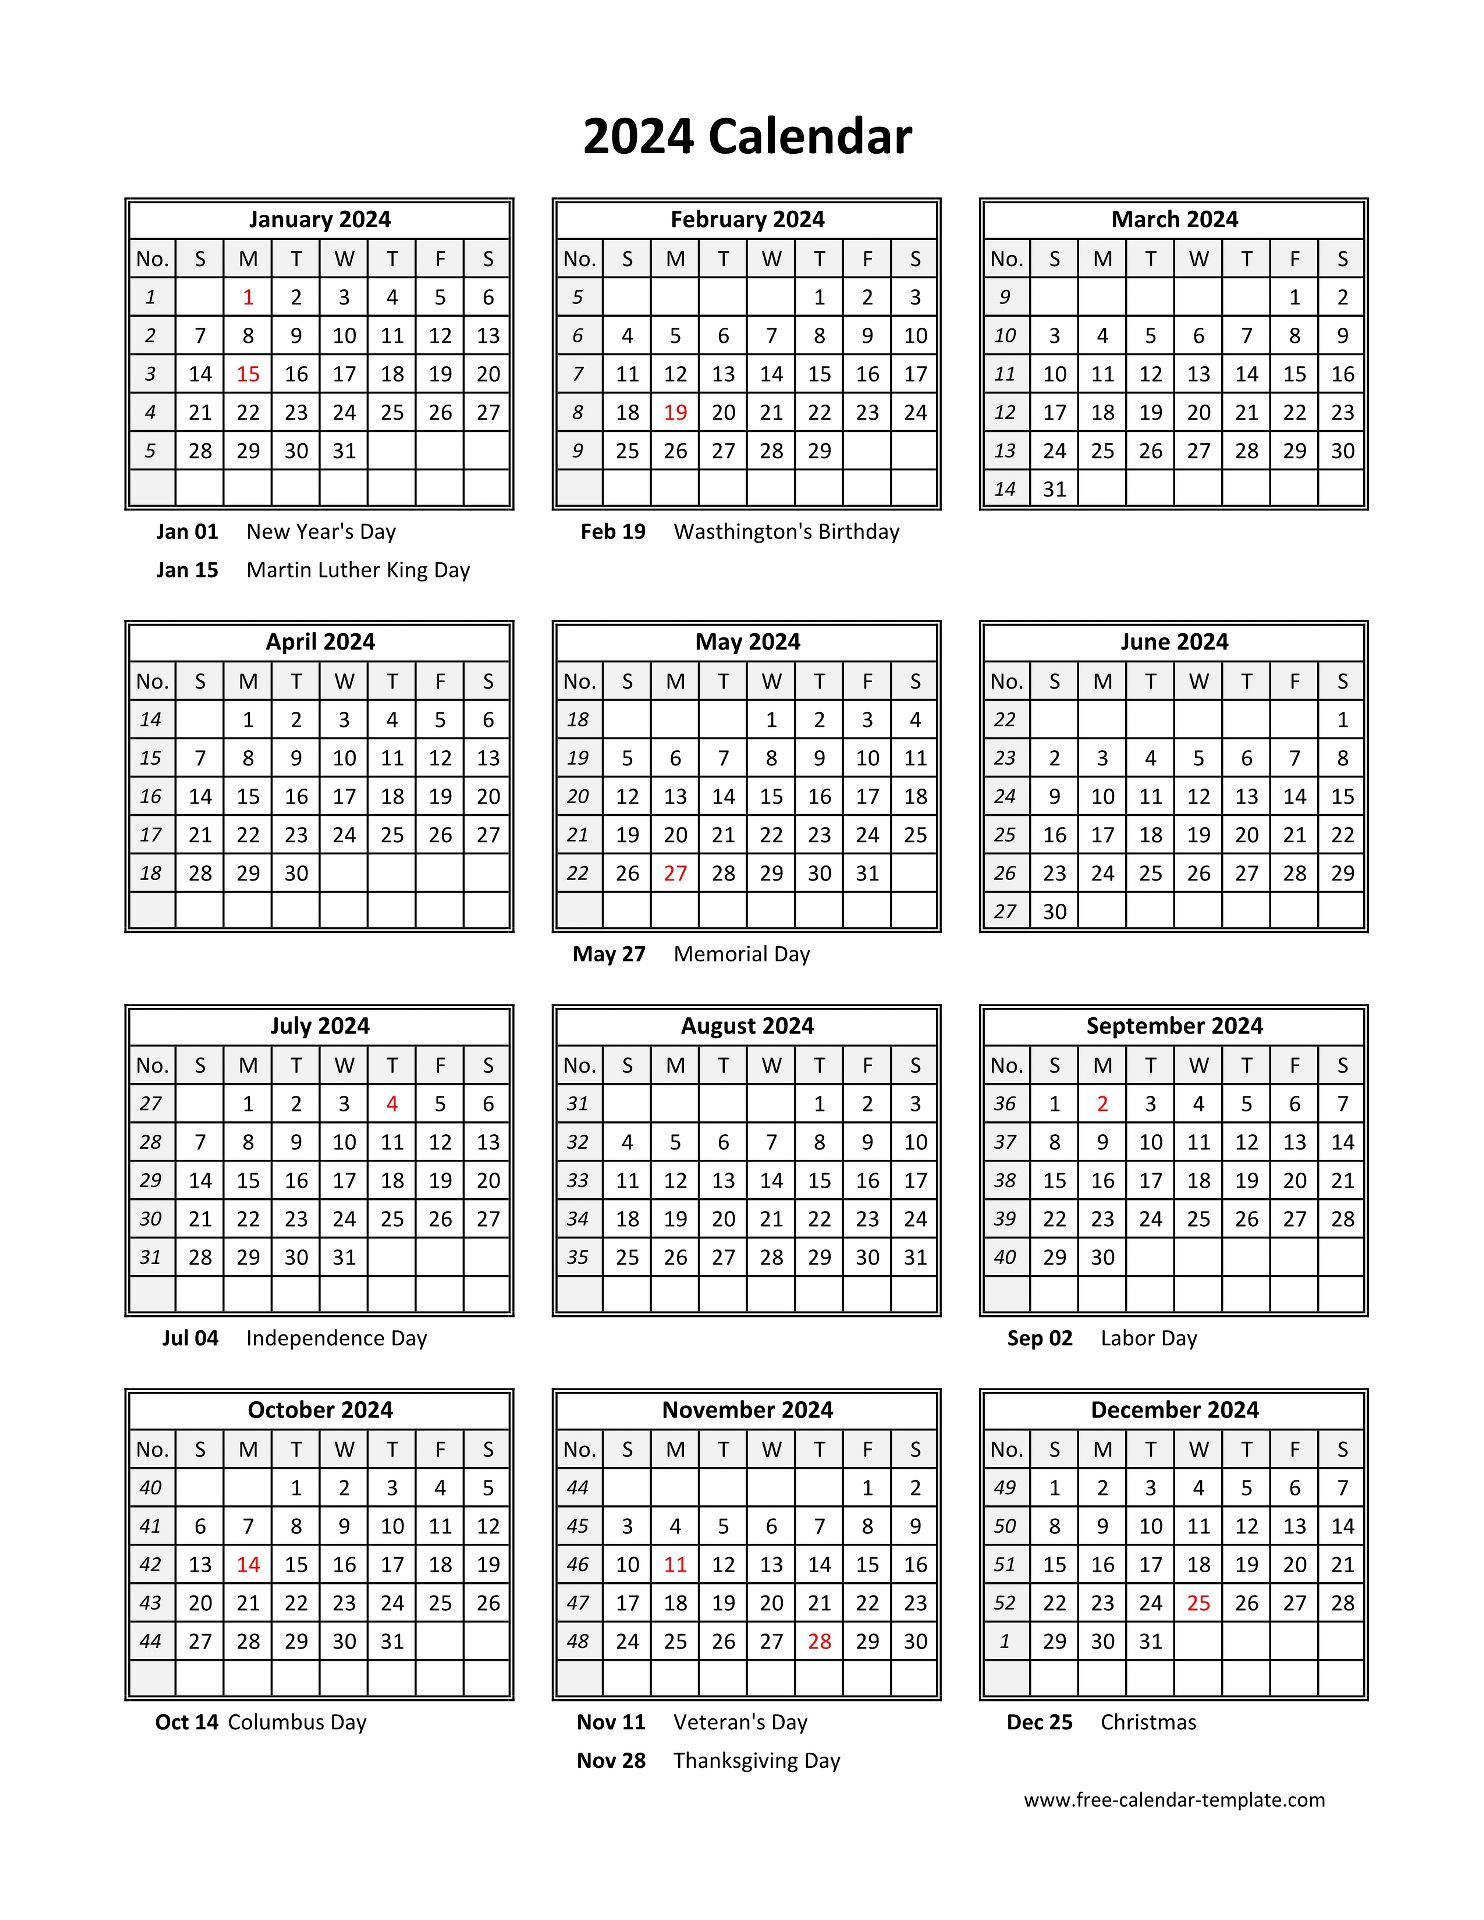 Yearly Printable Calendar 2024 With Holidays | Free-Calendar | Printable Calendar 2024 Whole Year